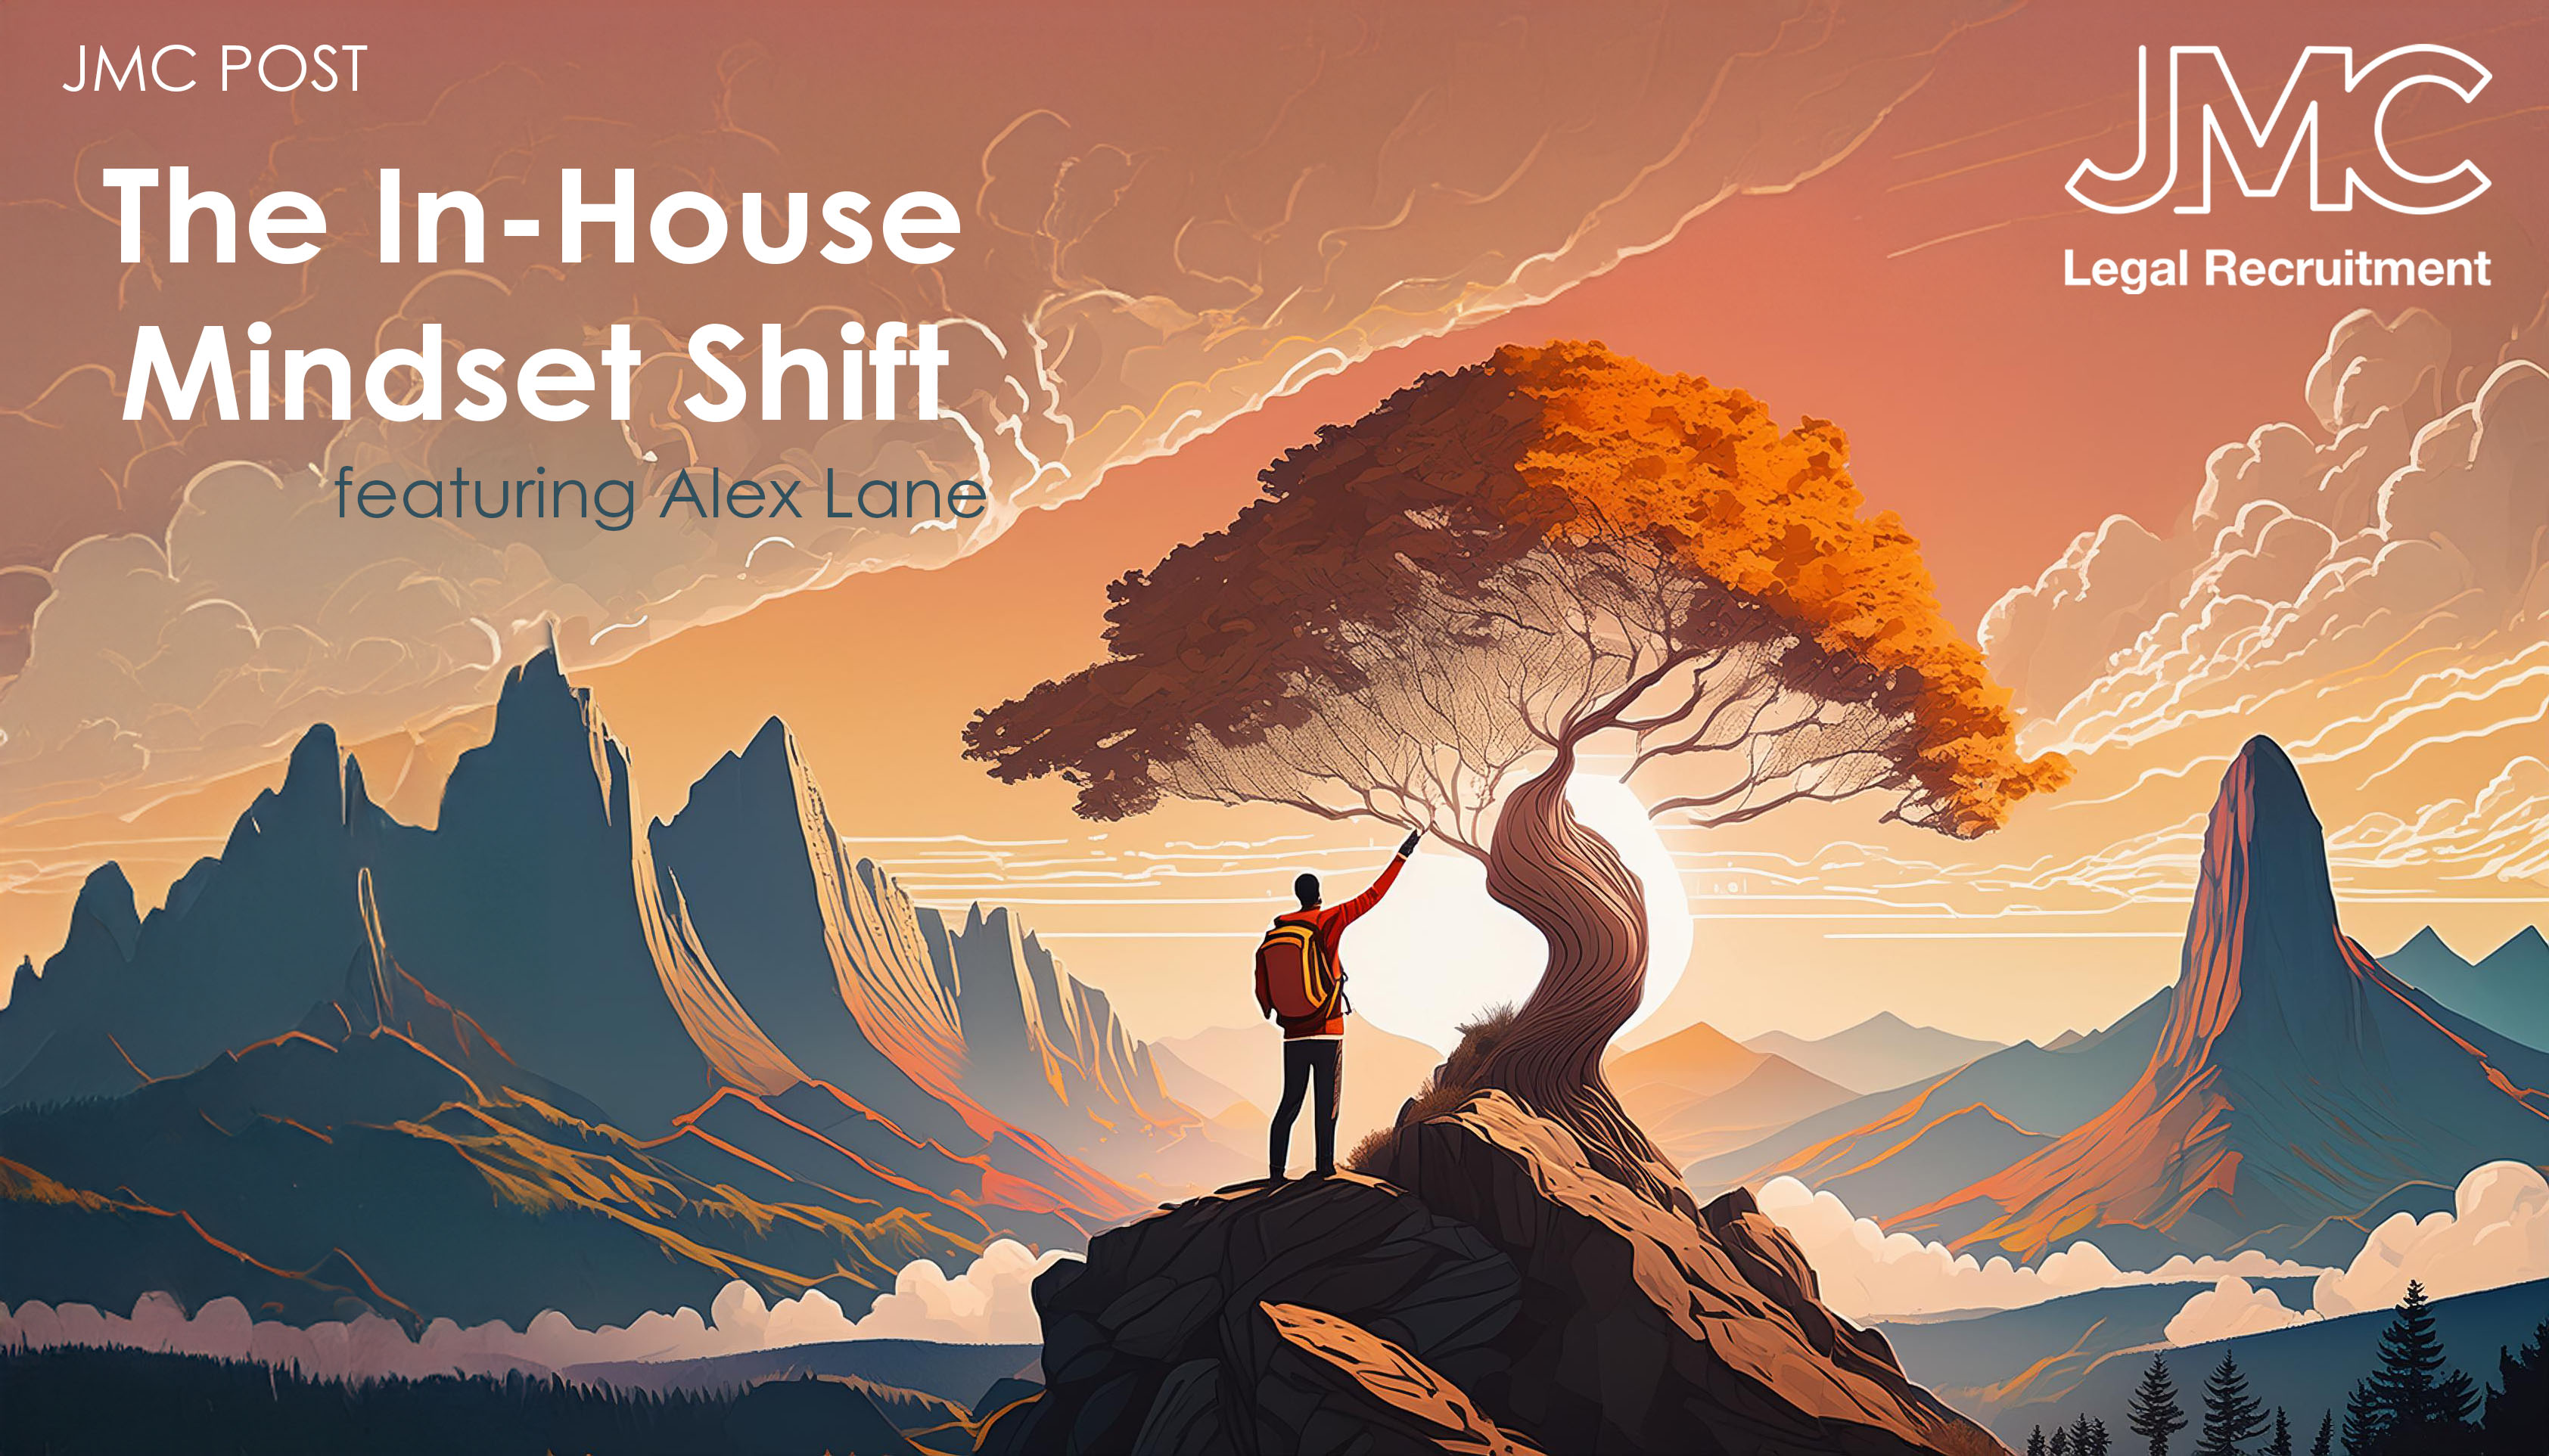 The In-House Mindset Shift with Alex Lane